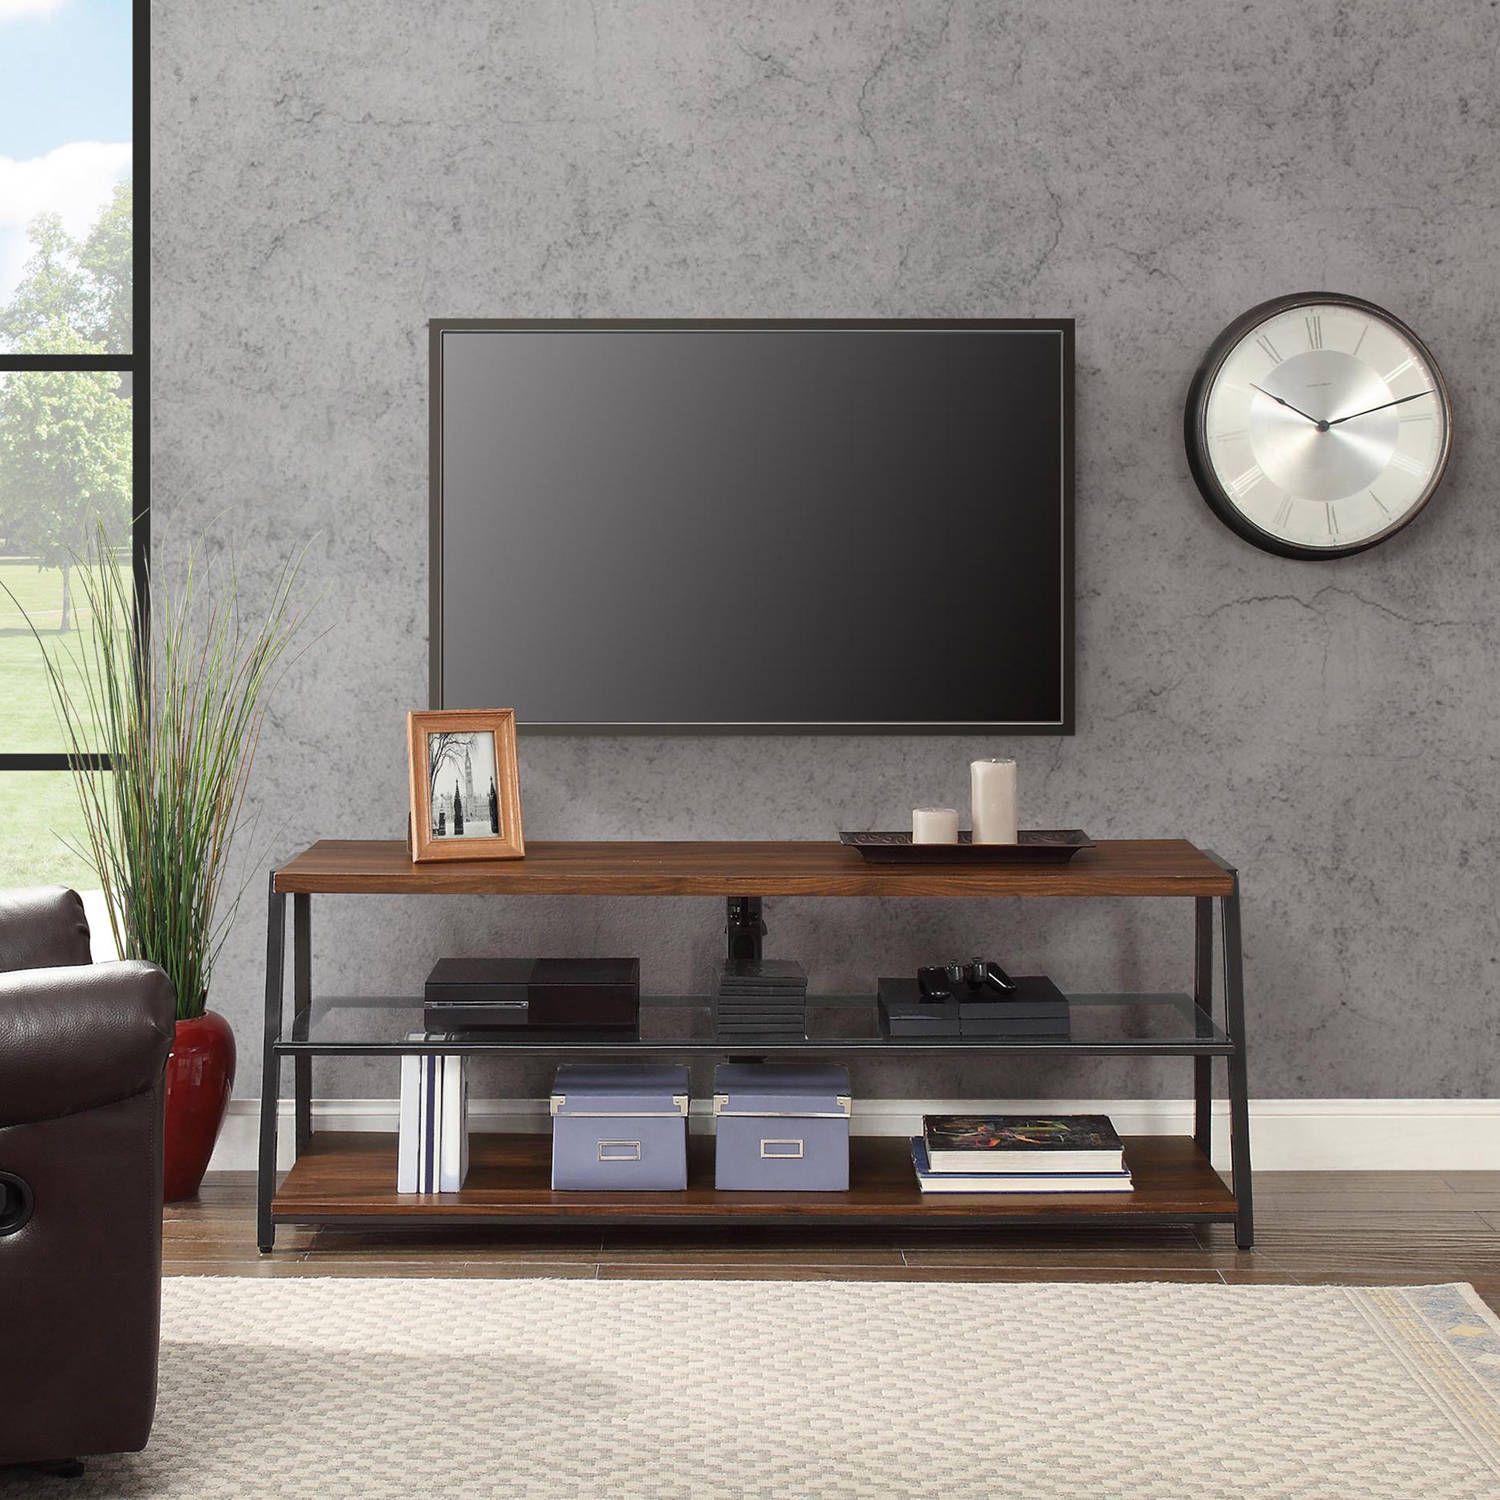 Mainstays Arris 3 In 1 Tv Stand For Televisions Up To 70 Throughout Mainstays Arris 3 In 1 Tv Stands In Canyon Walnut Finish (View 5 of 15)